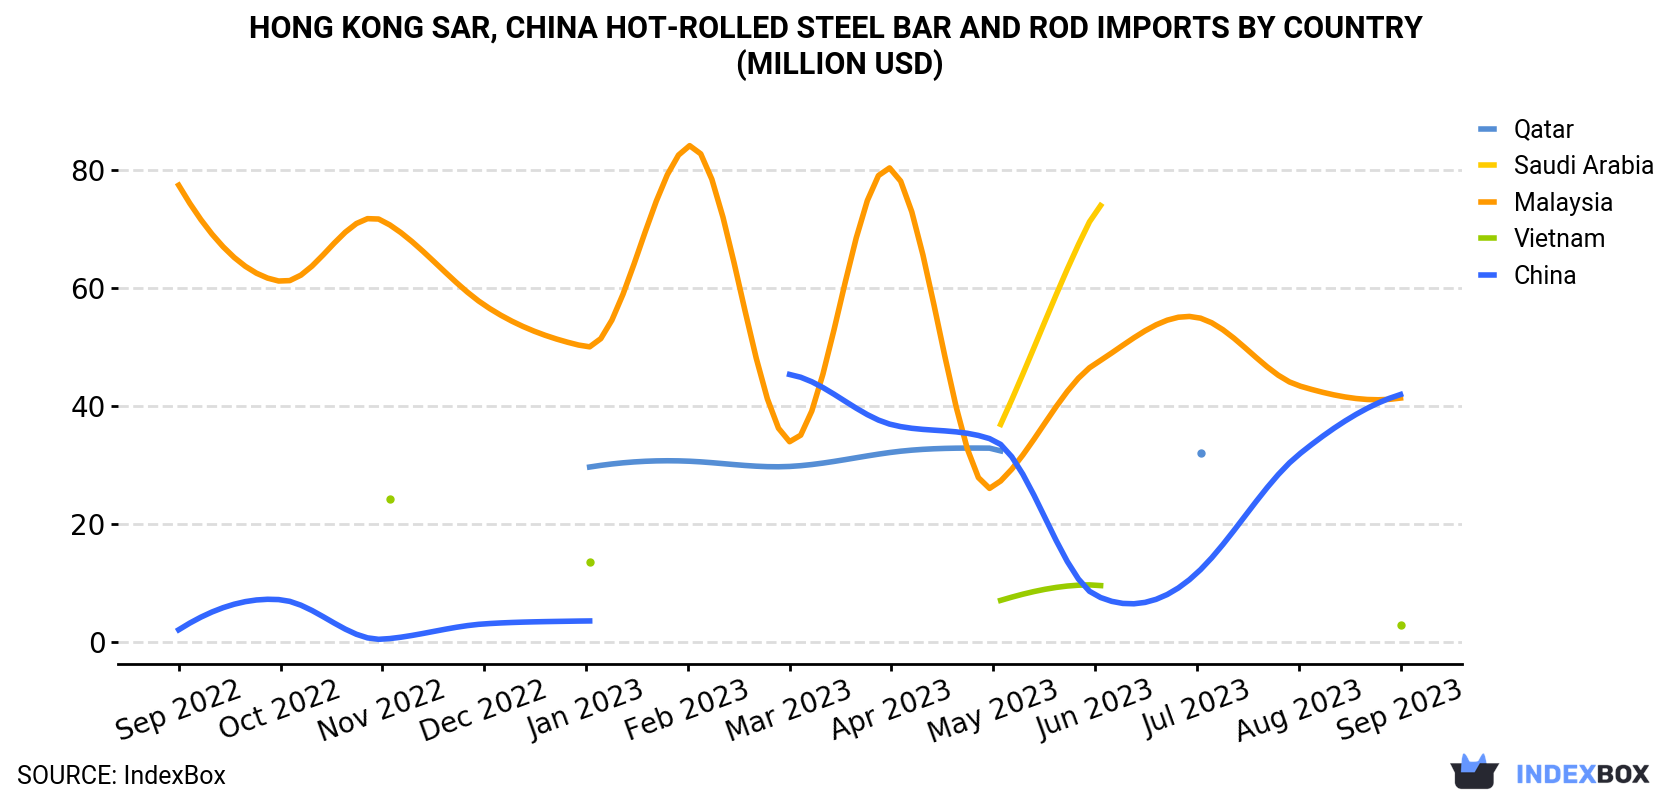 Hong Kong Hot-Rolled Steel Bar and Rod Imports By Country (Million USD)